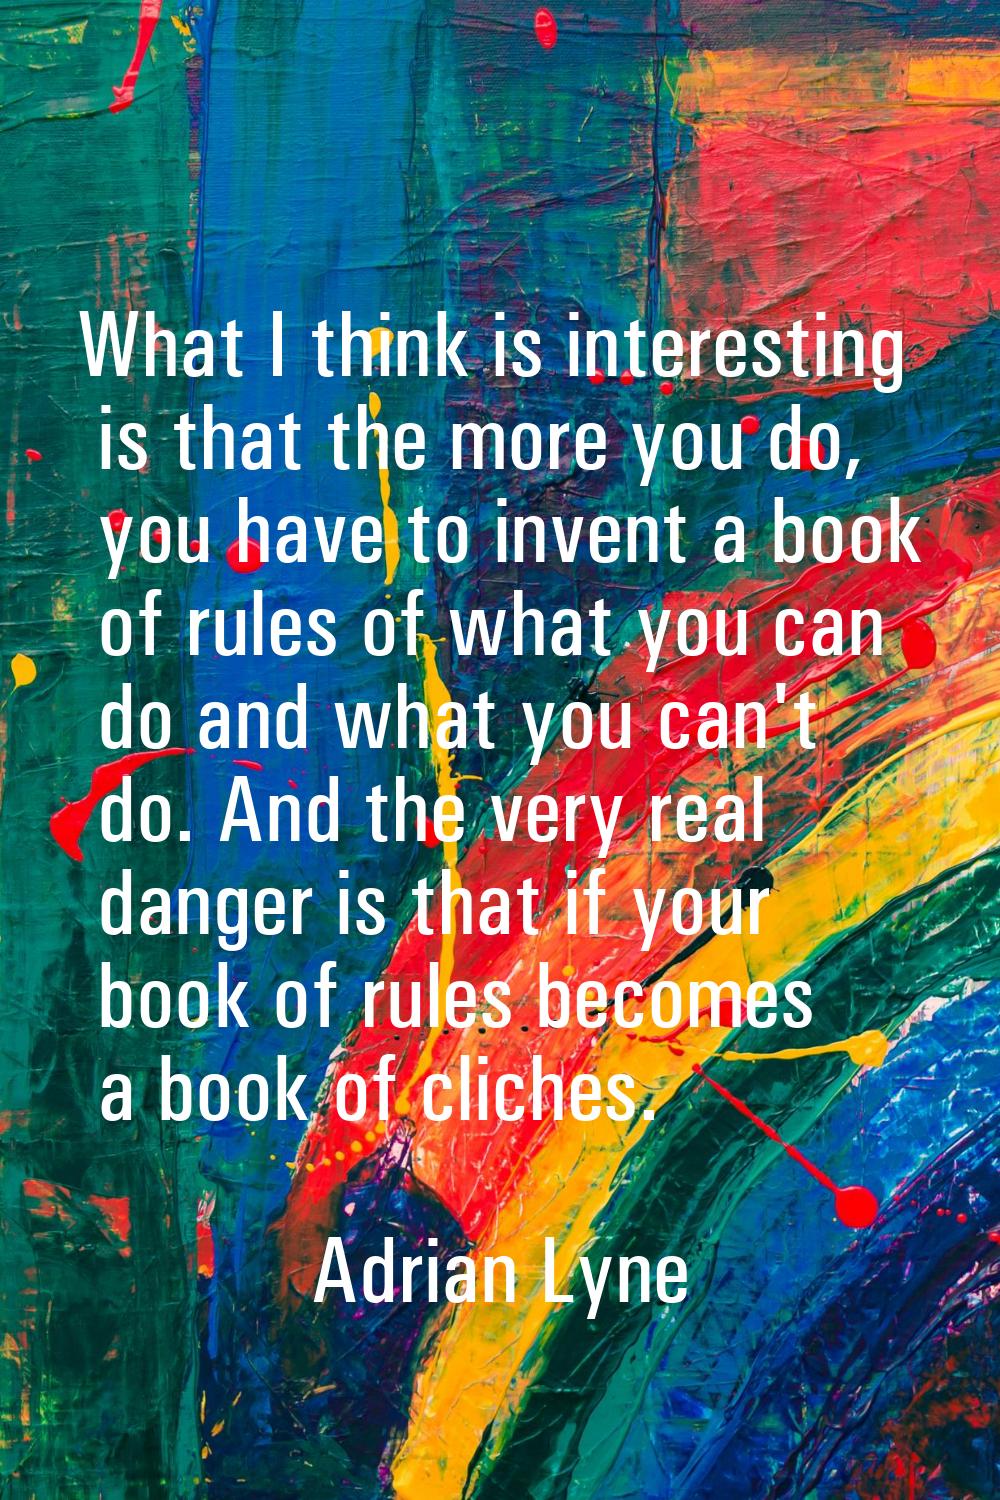 What I think is interesting is that the more you do, you have to invent a book of rules of what you